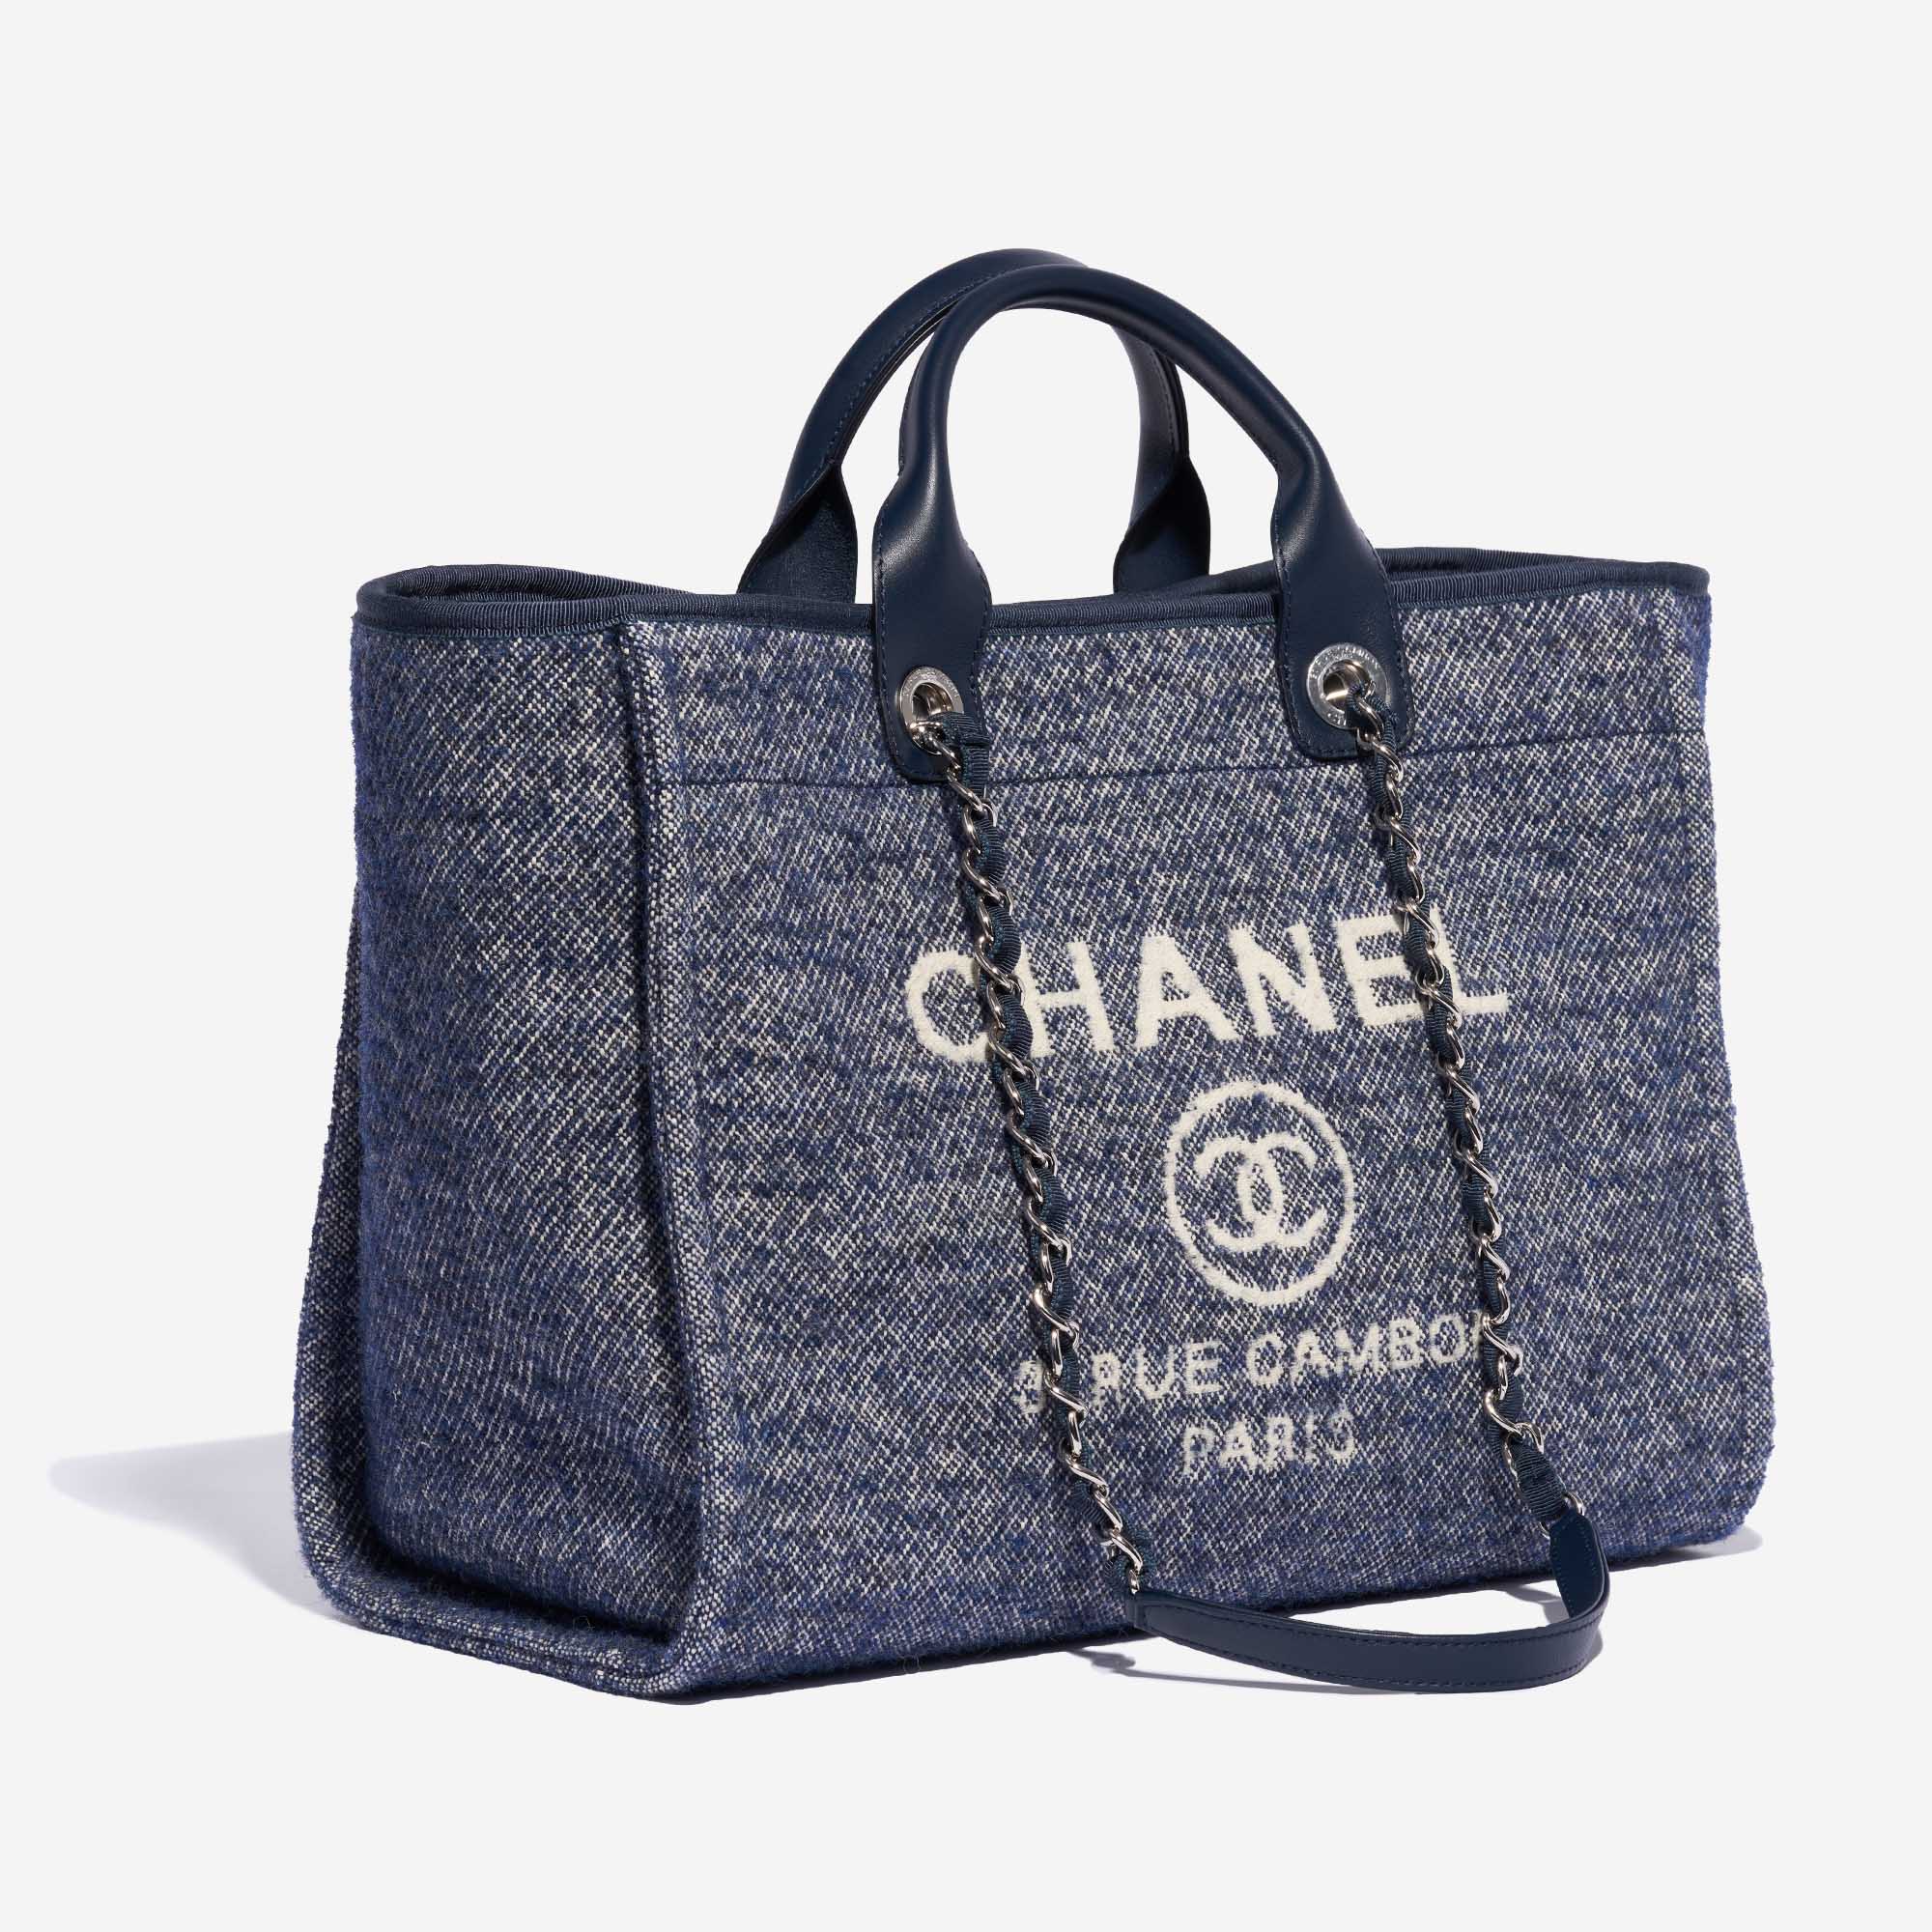 Deauville tweed tote Chanel Blue in Tweed - 36669022